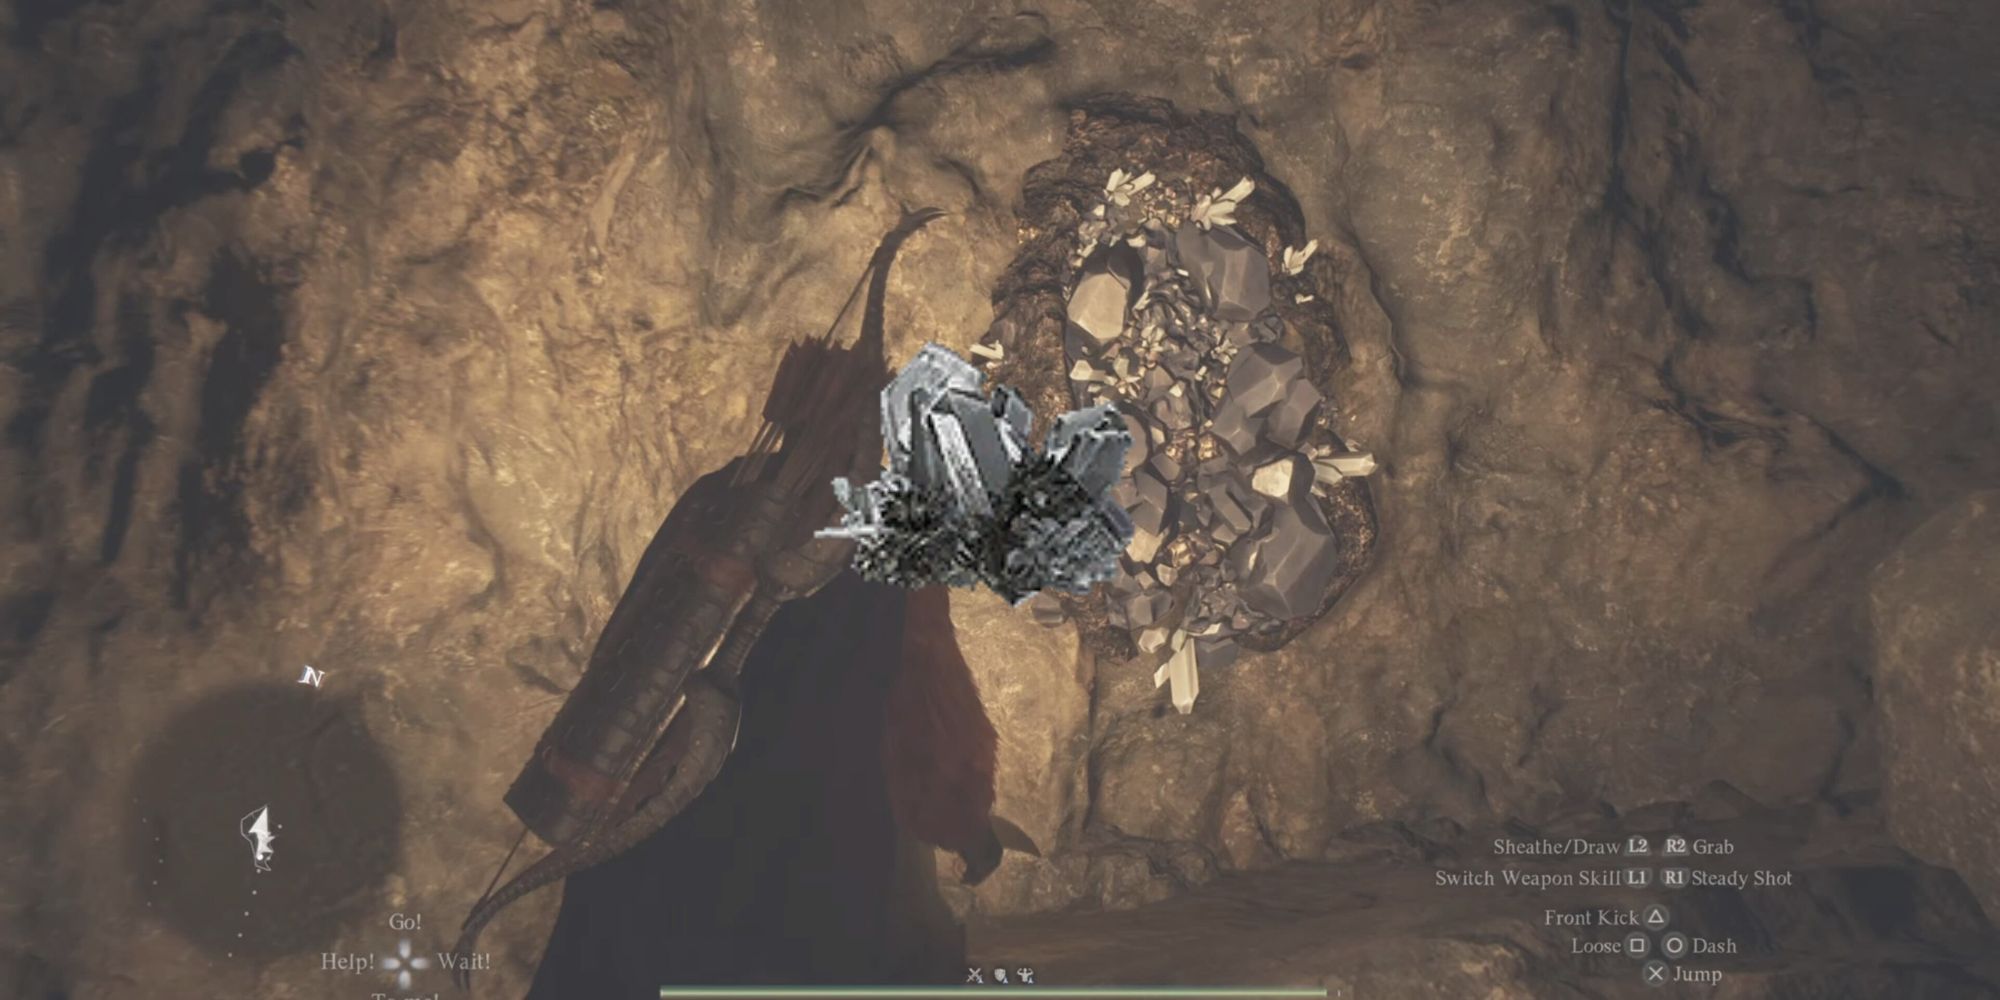 A Dragon's Dogma 2 mining Whitecobble with an image of the material in the foreground